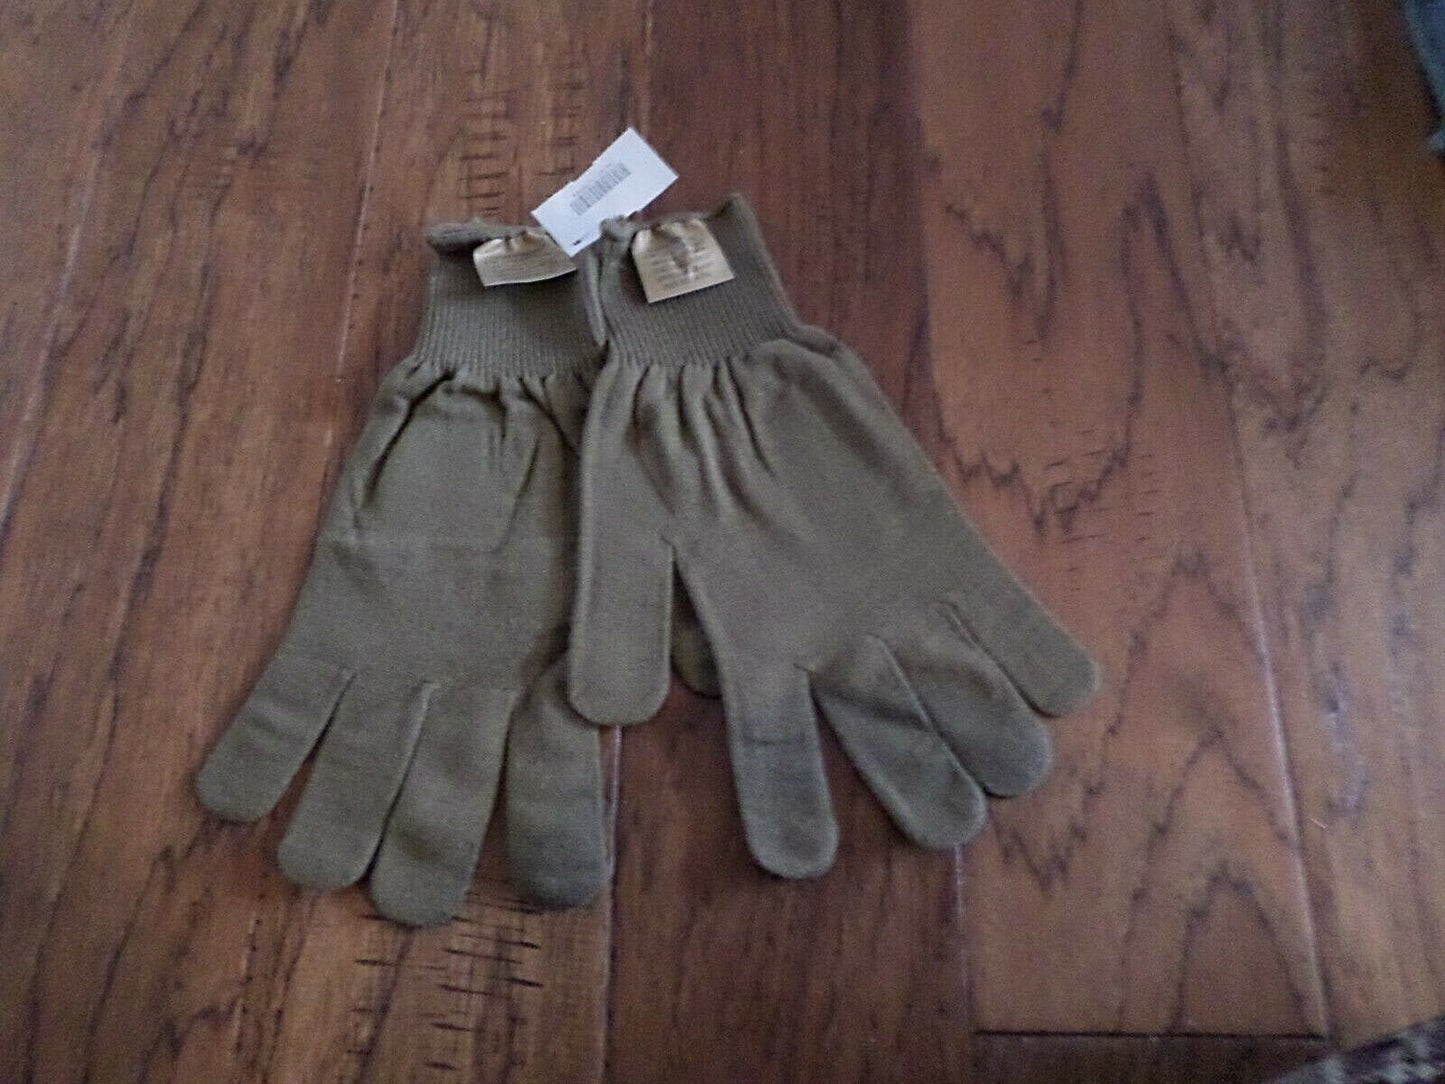 U.S MILITARY ISSUE COLD WEATHER GLOVE INSERTS LINERS SIZE X- LARGE